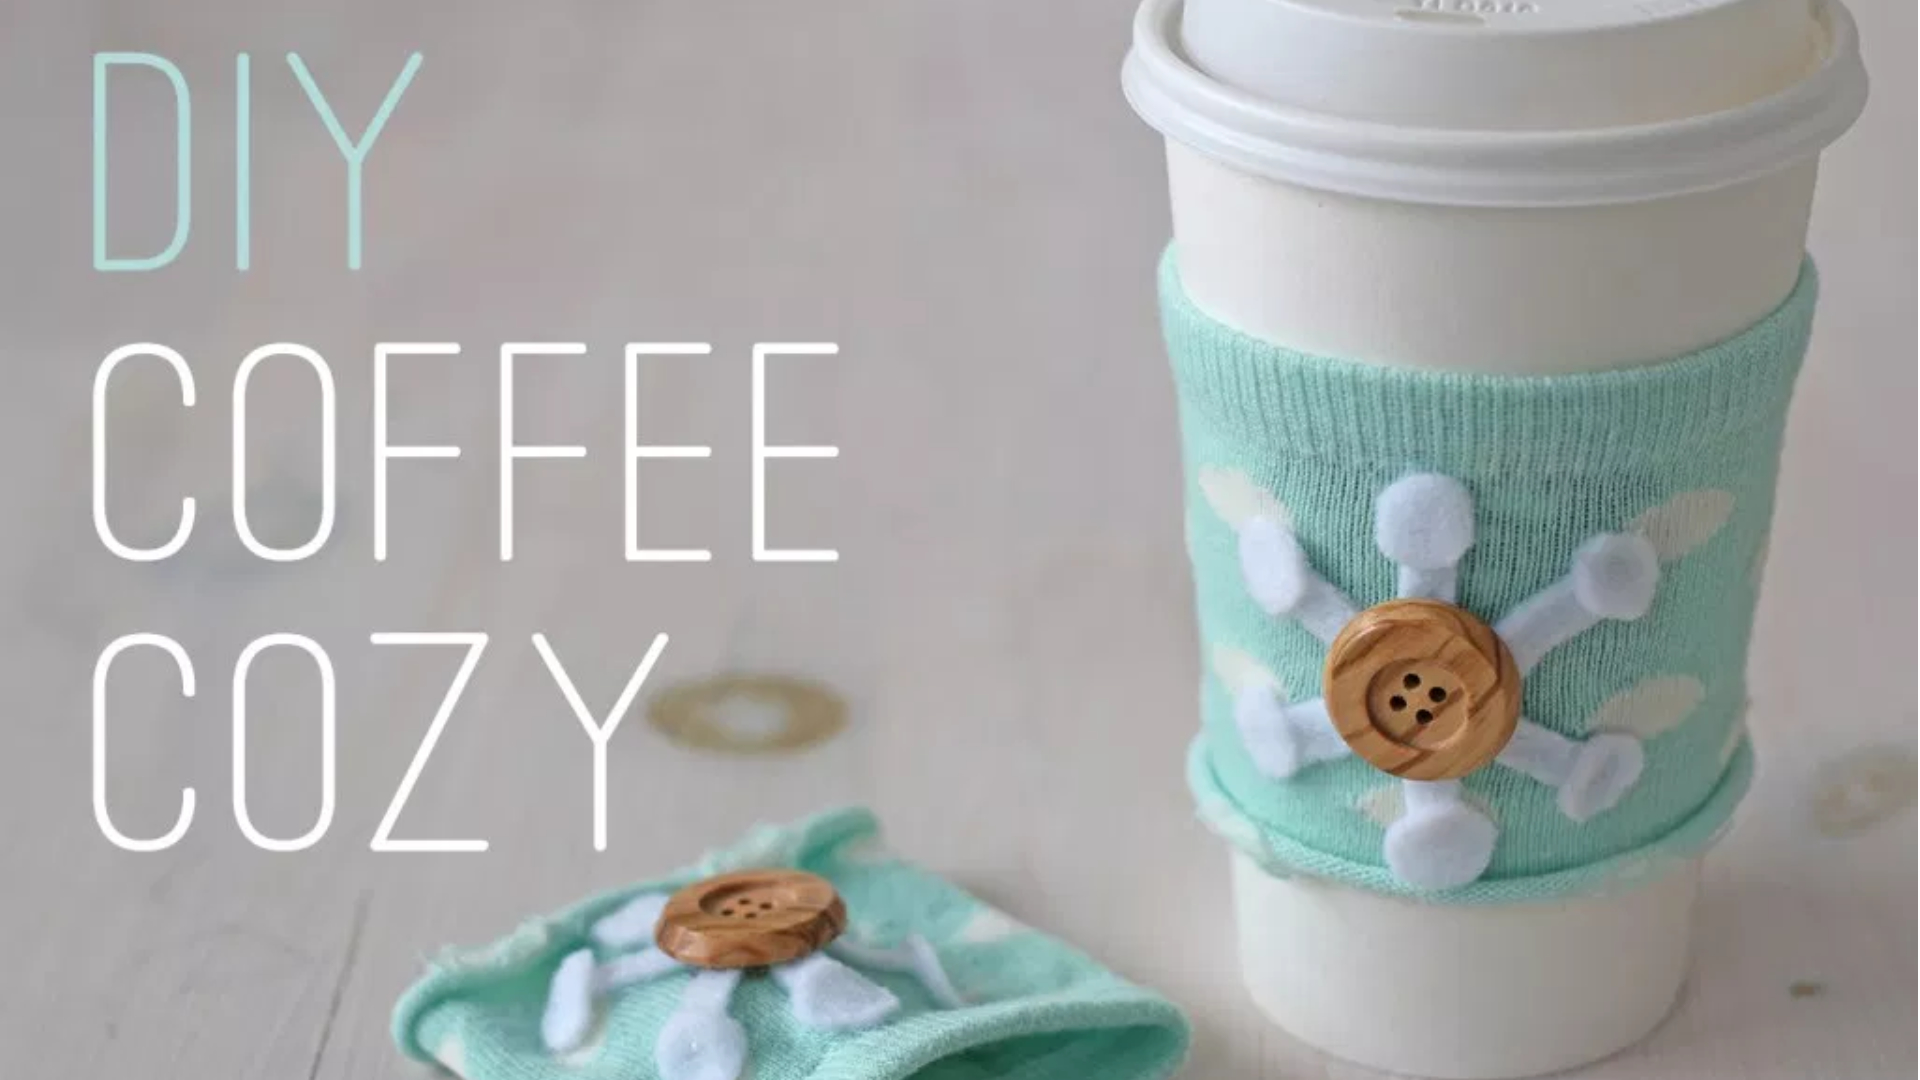 http://splashofsomething.com/2013/11/15/an-easy-peasy-no-sew-craft-to-keep-your-coffee-cozy/